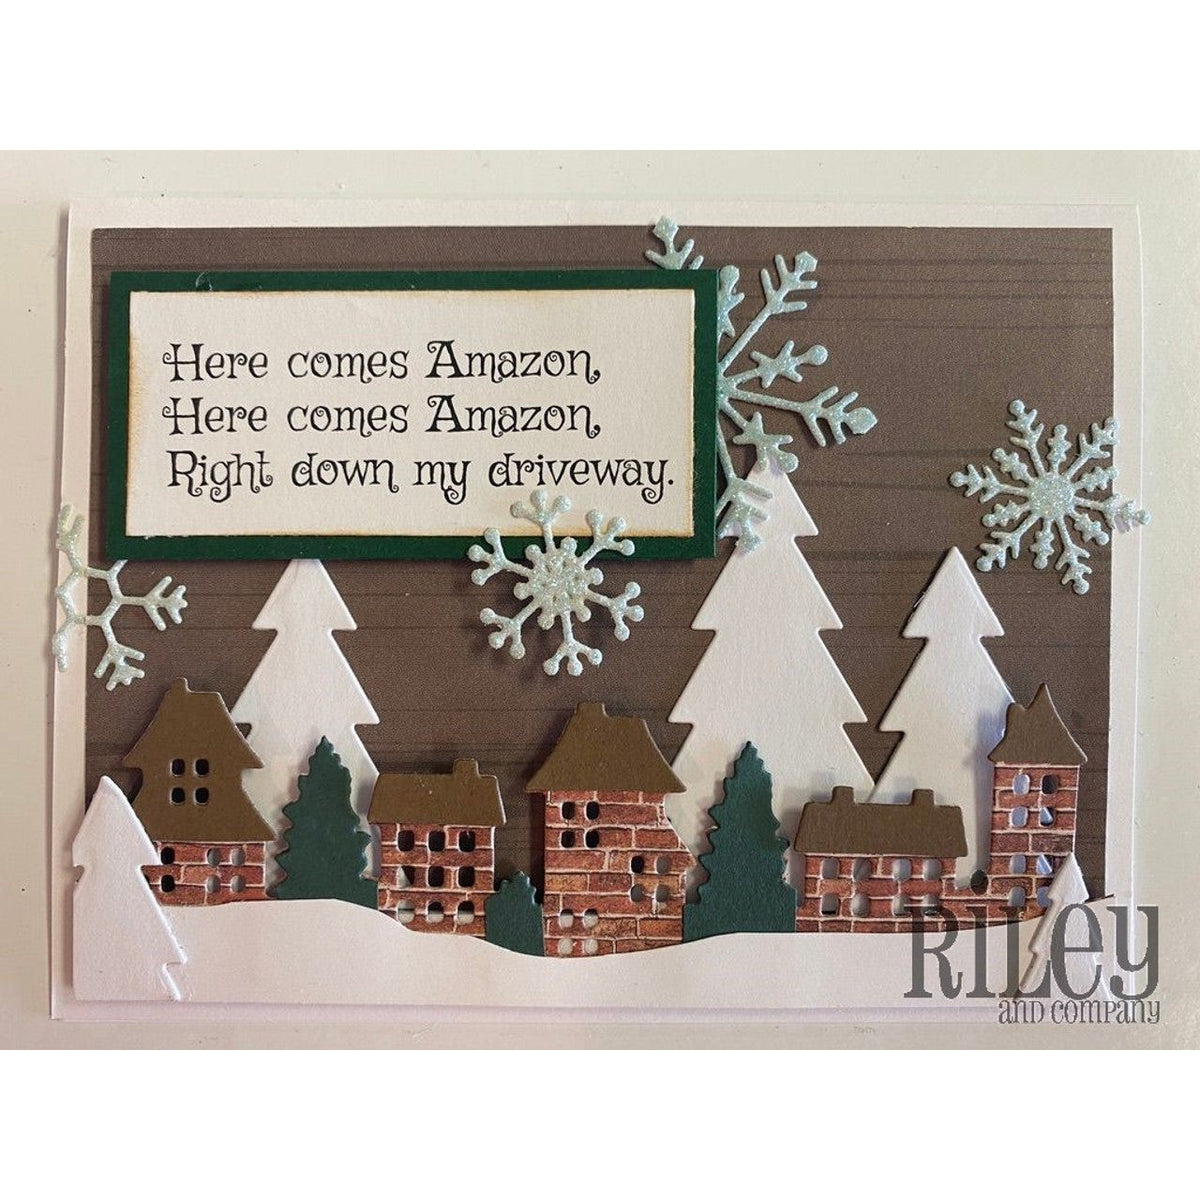 Here Comes Amazon Cling Stamp by Riley &amp; Co